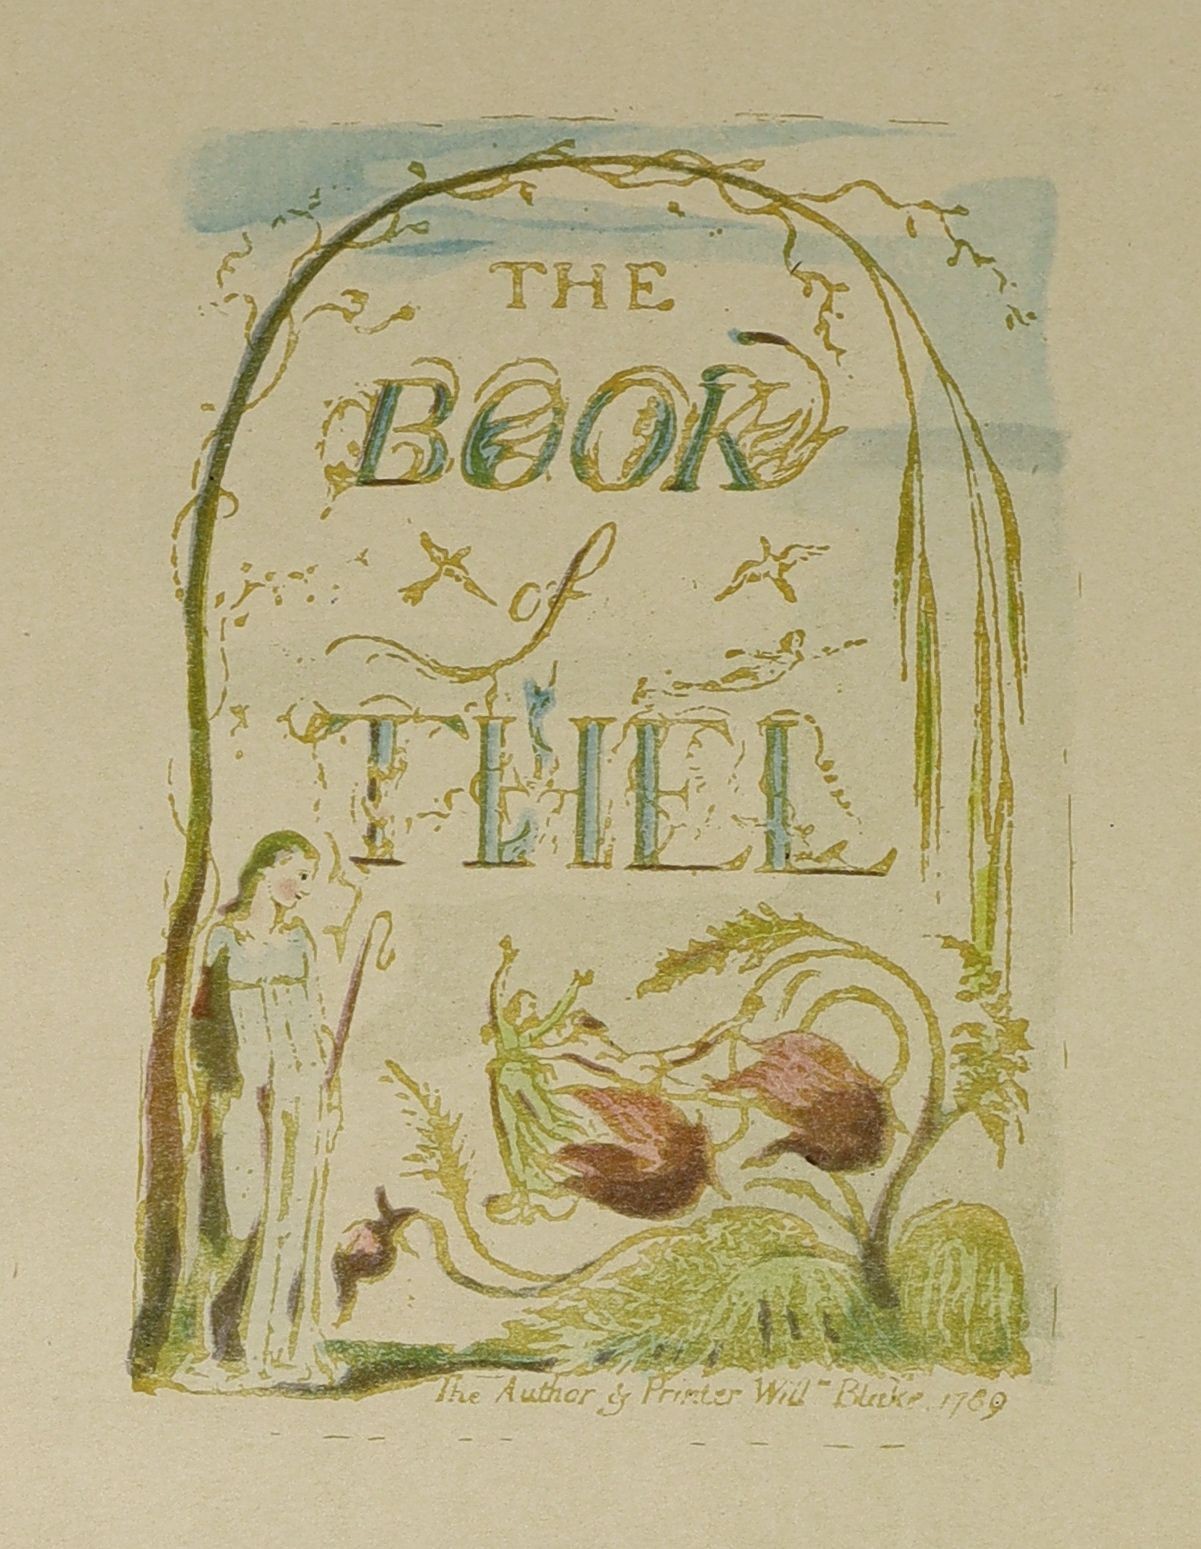 Nonesuch Press 4 works - Philips, Ambrose - The Illustrations of William Blake, one of 1000, 8vo, with a portfolio of 18 extra plates in a rear pocket, 1937; Blake, William - The Book of Thel, one of 850, Victor Gollancz